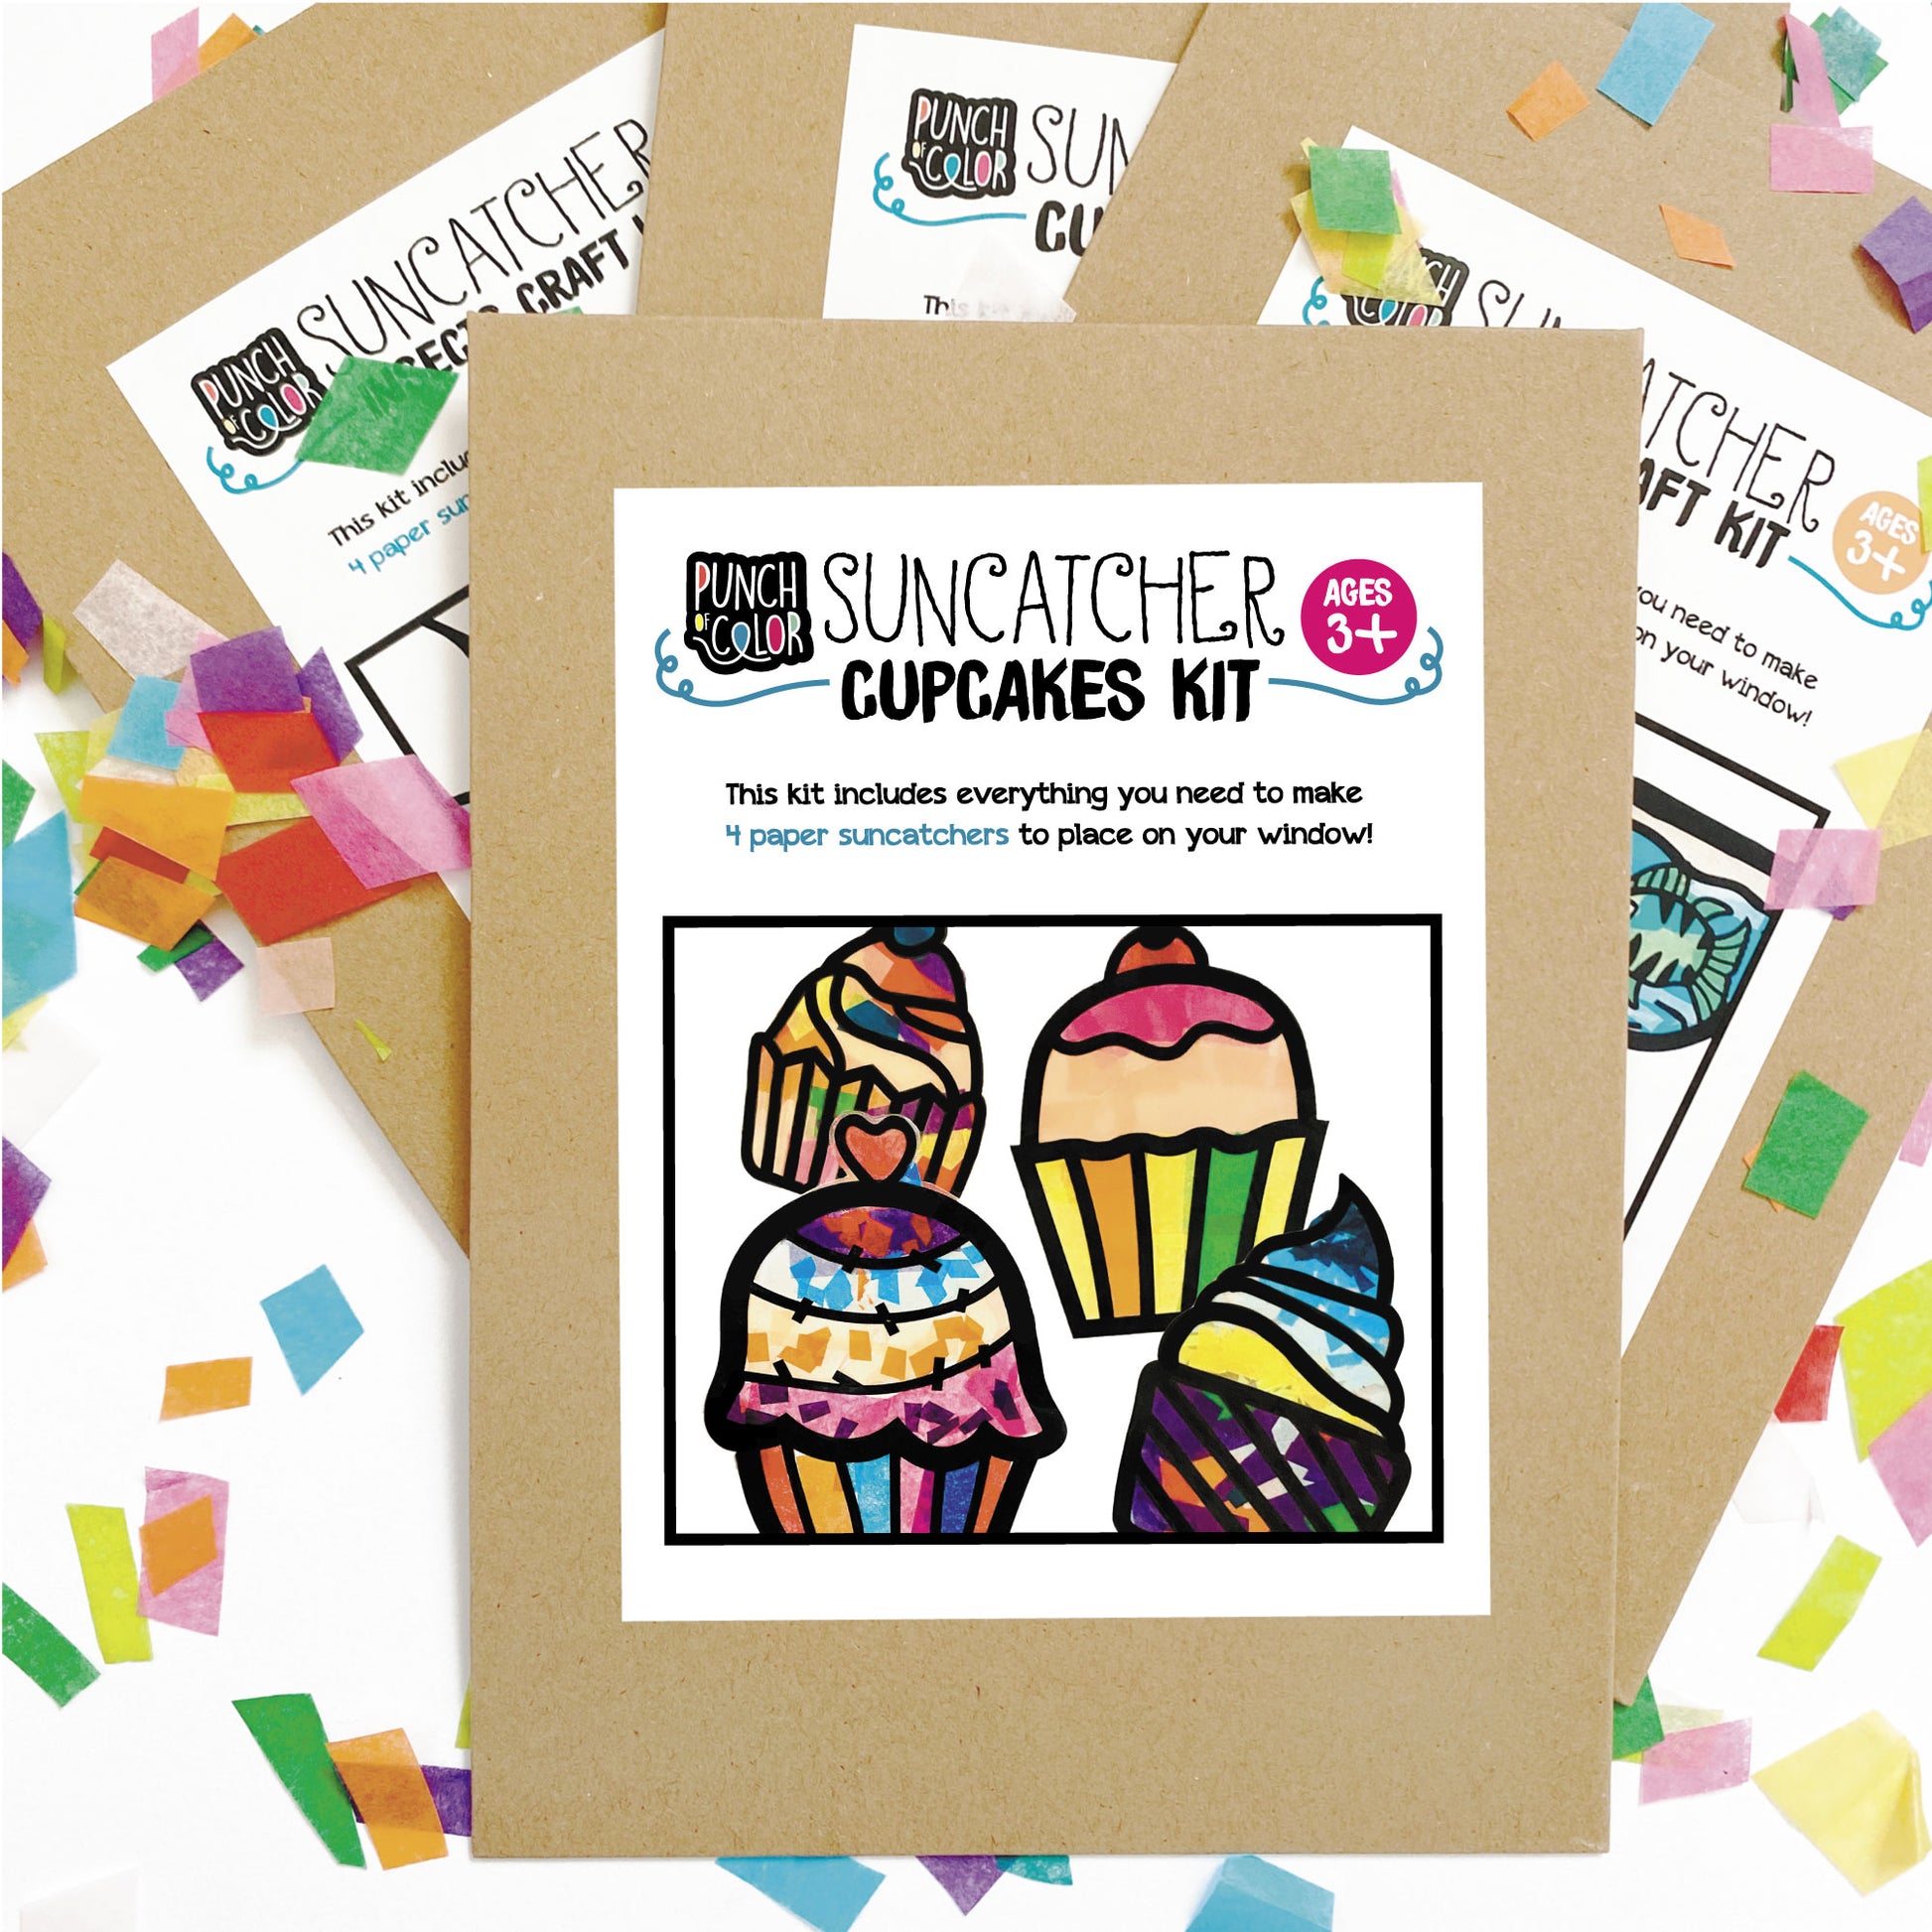 Cupcakes suncatcher arts and crafts kit, a mess-free paper based activity for toddlers and kids.